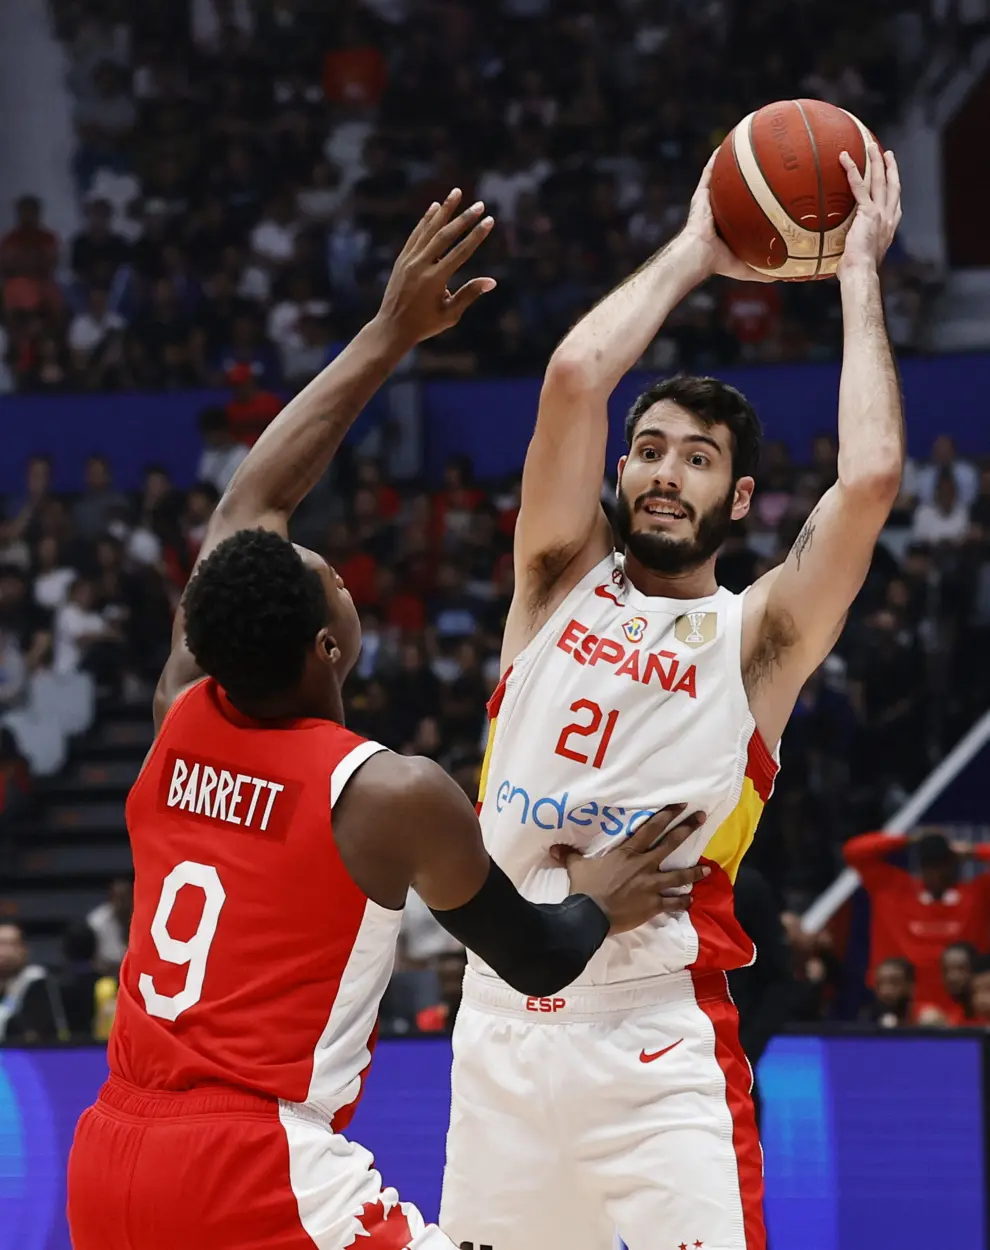 Basketball - FIBA World Cup 2023 - Second Round - Group L - Spain v Canada  - Indonesia Arena, Jakarta, Indonesia - September 3, 2023 Spain's Willy Hernangomez in action with Canada's Dillon Brooks REUTERS/Willy Kurniawan BASKETBALL-WORLDCUP-ESP-CAN/